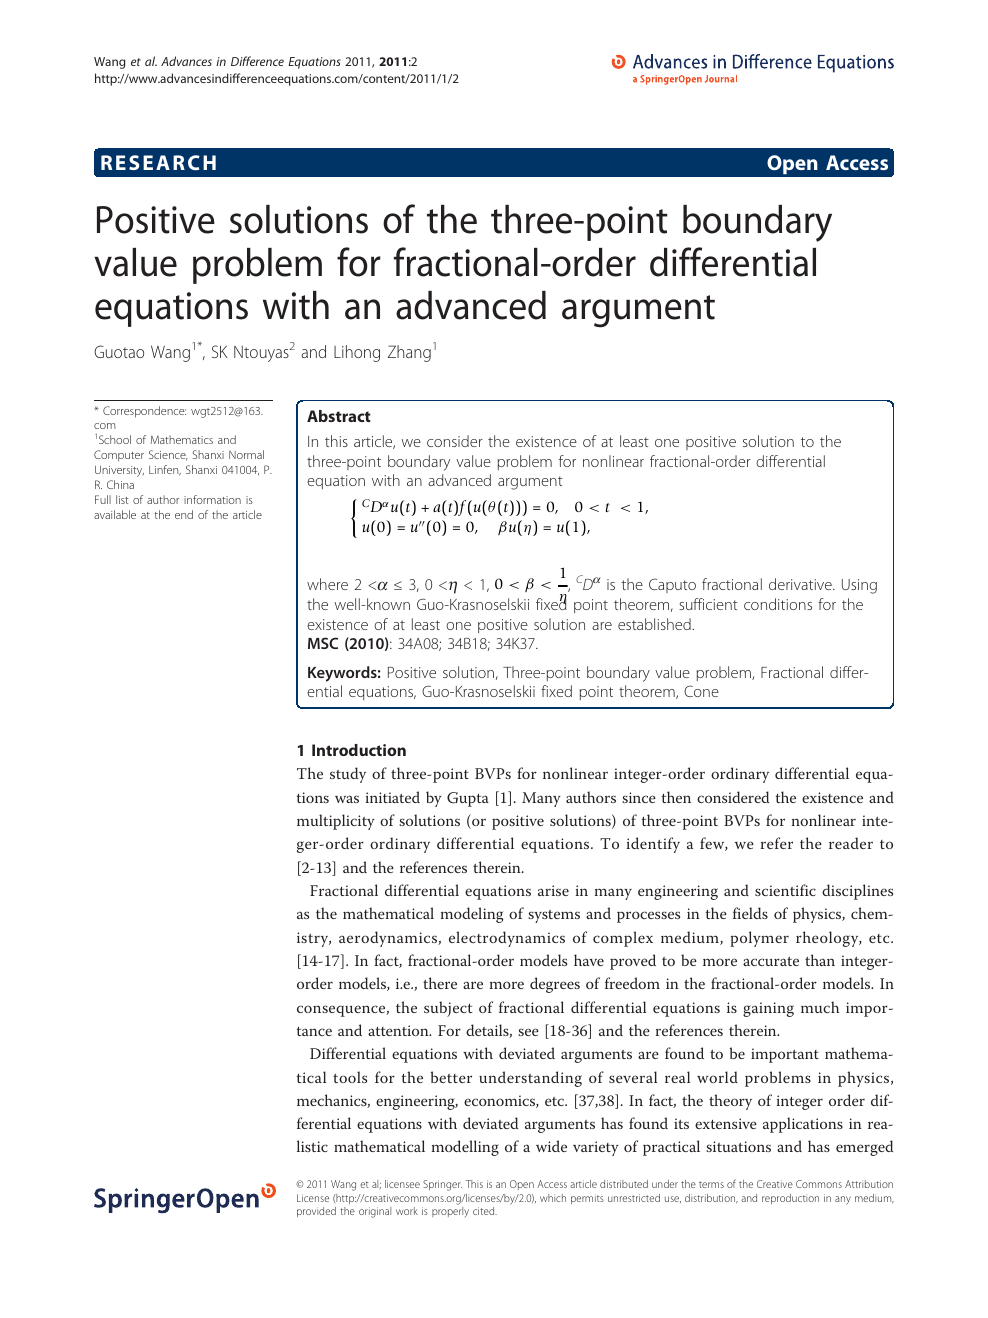 Positive Solutions Of The Three Point Boundary Value Problem For Fractional Order Differential Equations With An Advanced Argument Topic Of Research Paper In Mathematics Download Scholarly Article Pdf And Read For Free On